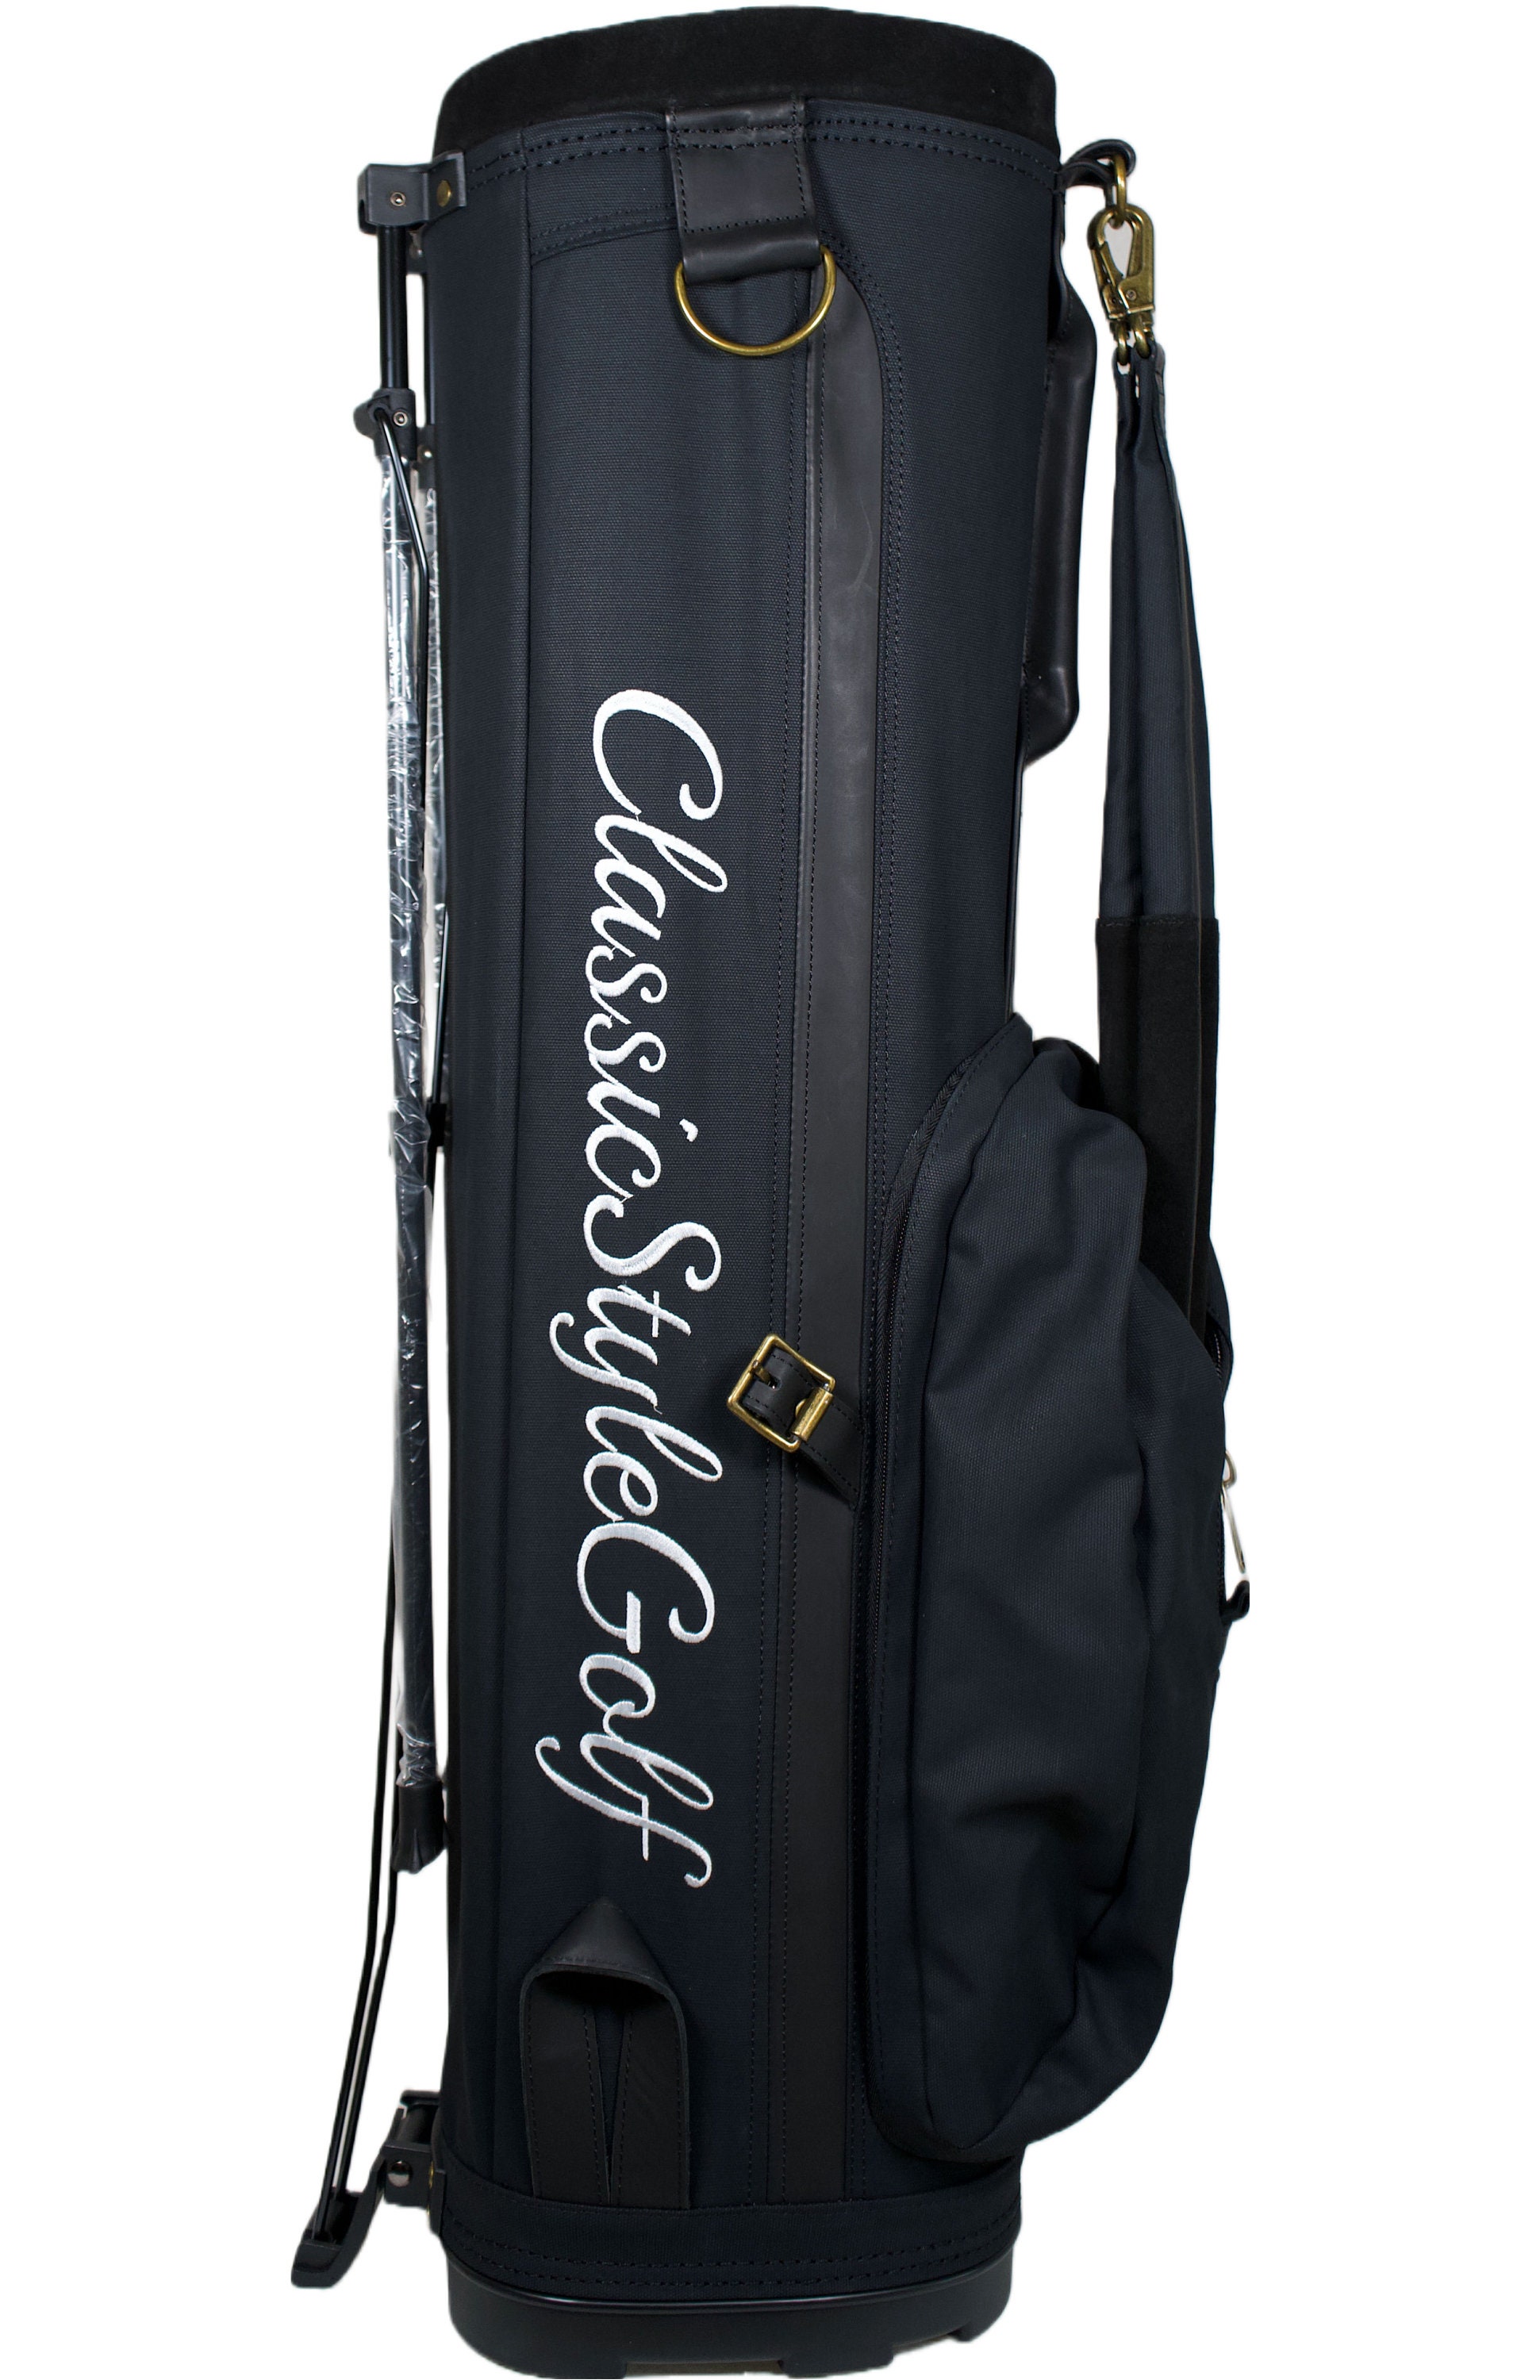 Golf Bag Damier Graphite Canvas - Art of Living - Sports and Lifestyle